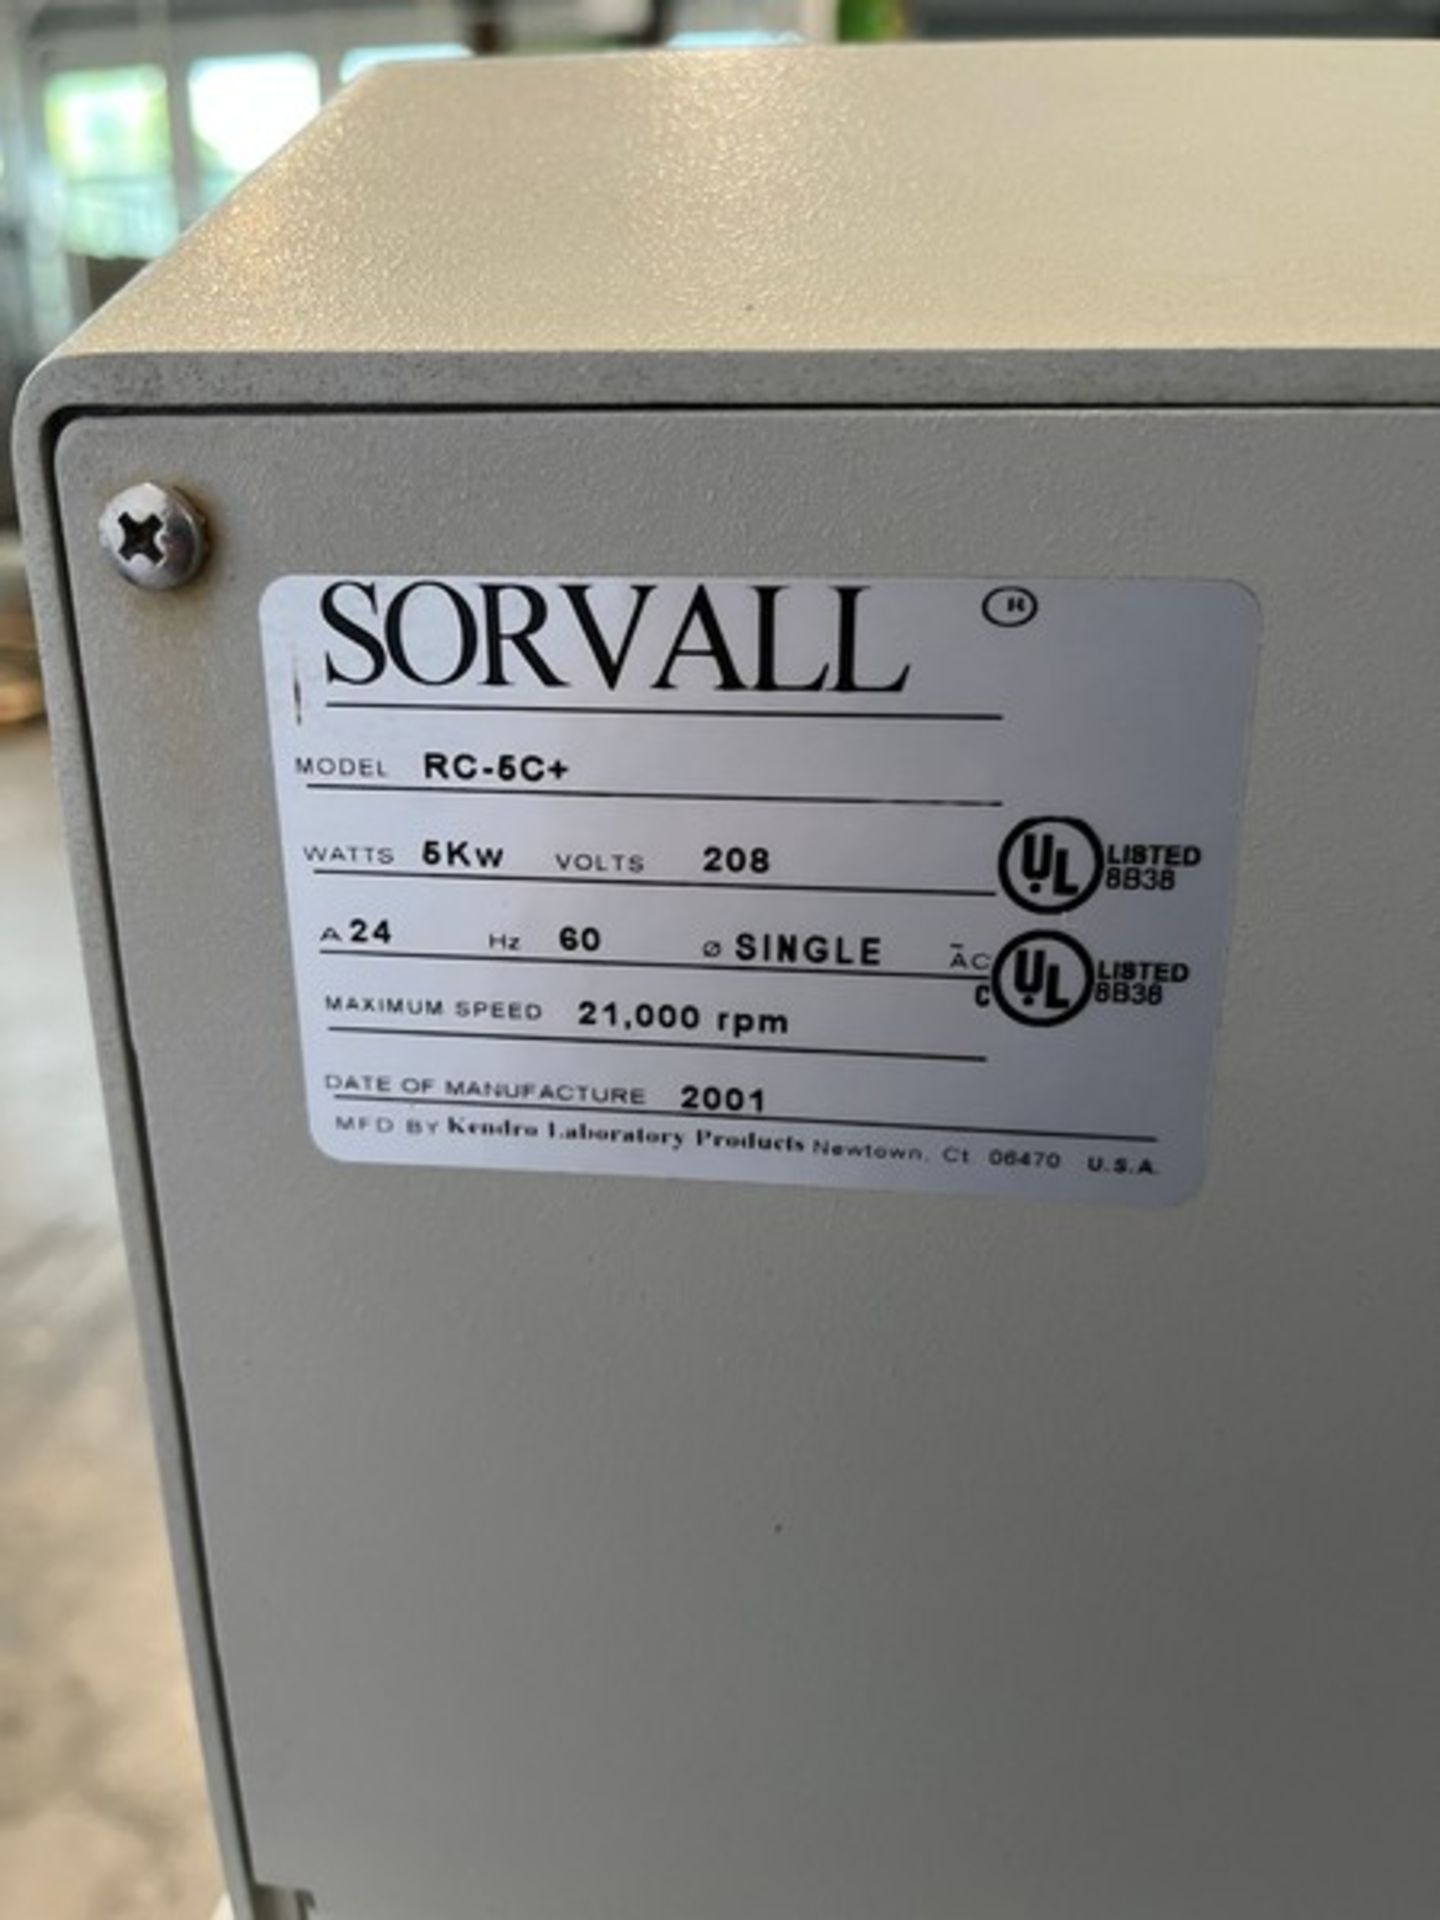 Sorvall RC5C Plus Centrifuge Sorvall RC5C Plus Centrifuge Model RC-5C+ WATTS 5Kw Volts:208 A24 Hz 60 - Image 3 of 7